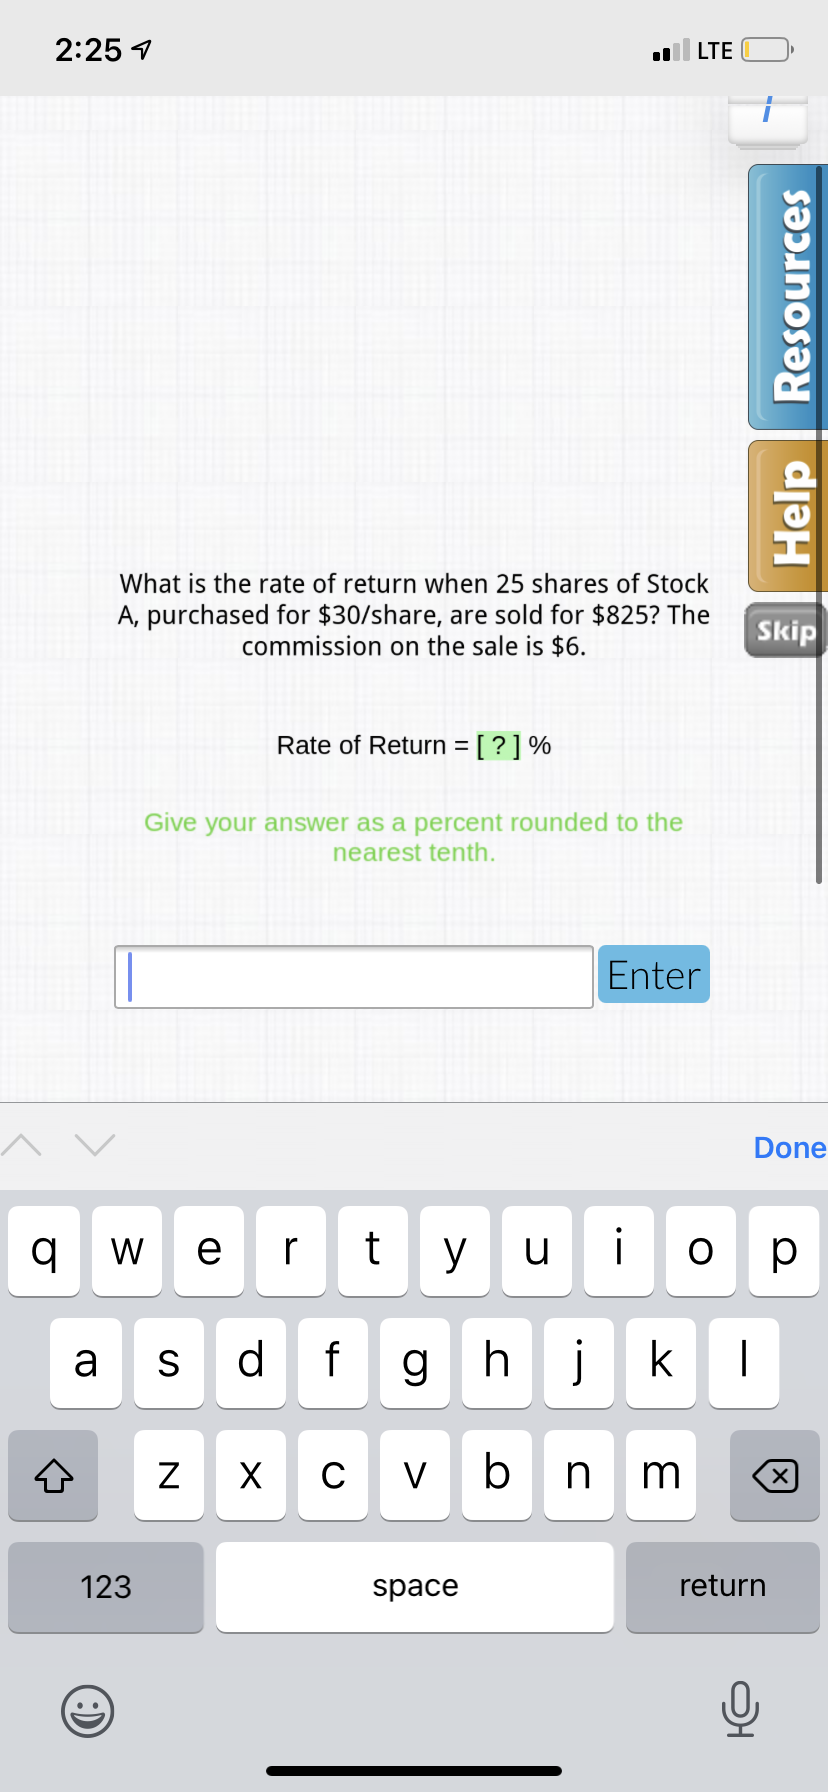 2:25 1
LTE
What is the rate of return when 25 shares of Stock
A, purchased for $30/share, are sold for $825? The
commission on the sale is $6.
Skip
Rate of Return = [ ? ] %
Give your answer as a percent rounded to the
nearest tenth.
Enter
Done
W e r
y
u
ор
a
S
d
f
g h
j
k
C
V
n m
123
space
return
Help Resources
